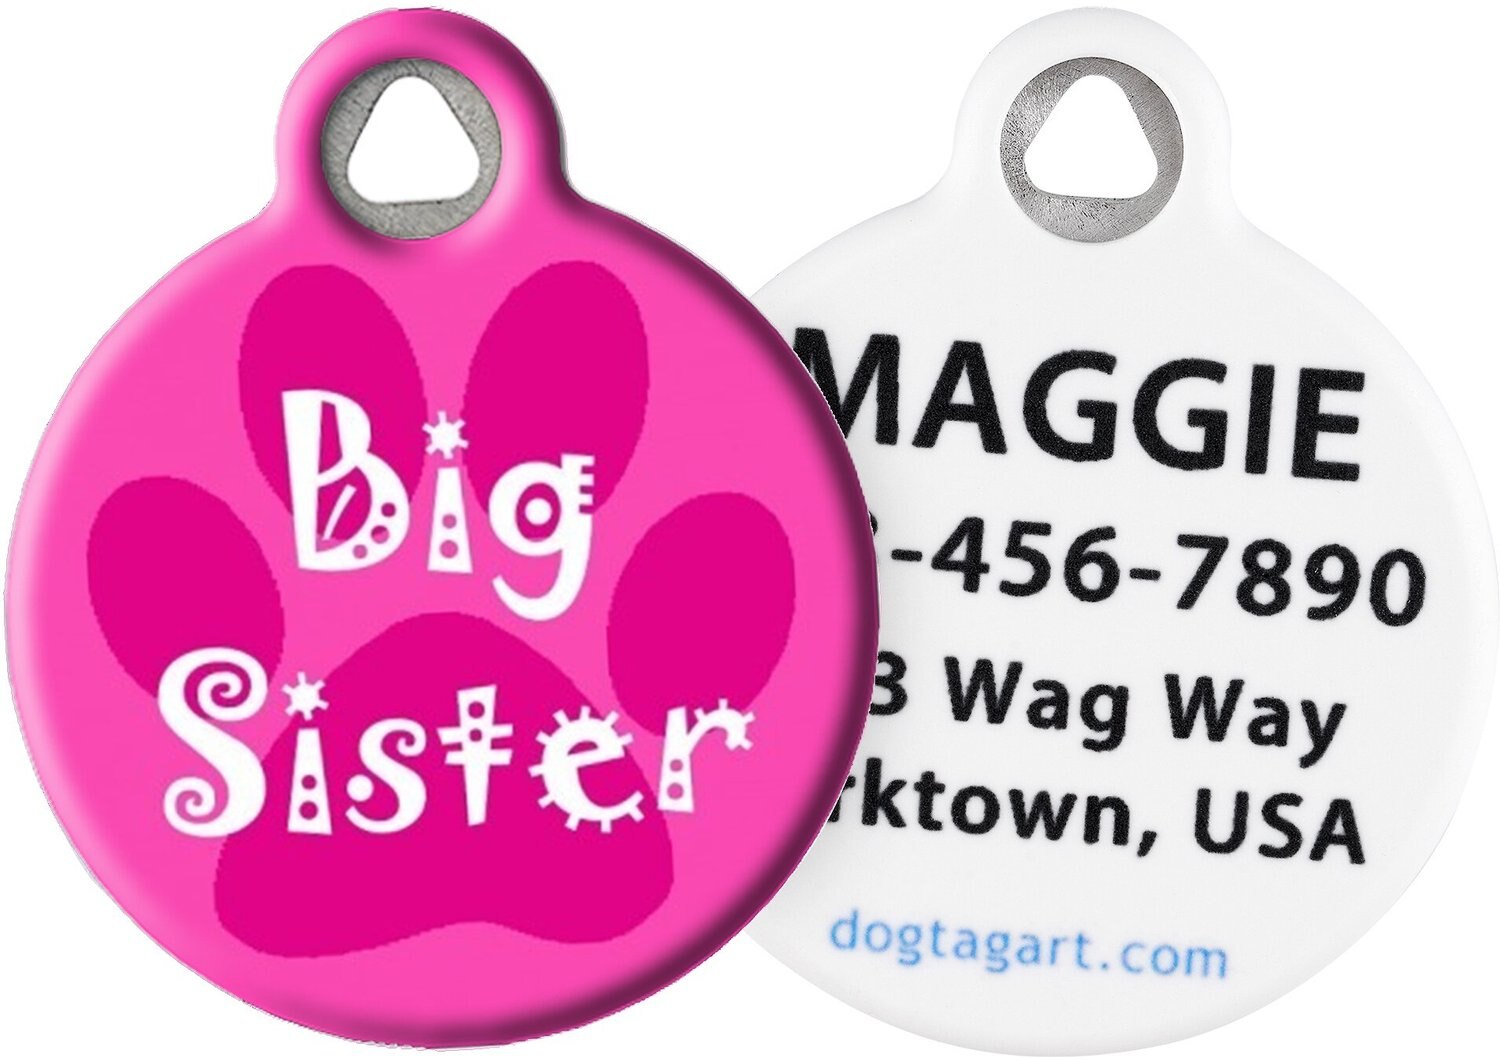 LITTLE SISTER Custom Personalized Pet ID Tag for Dog and Cat Collars 